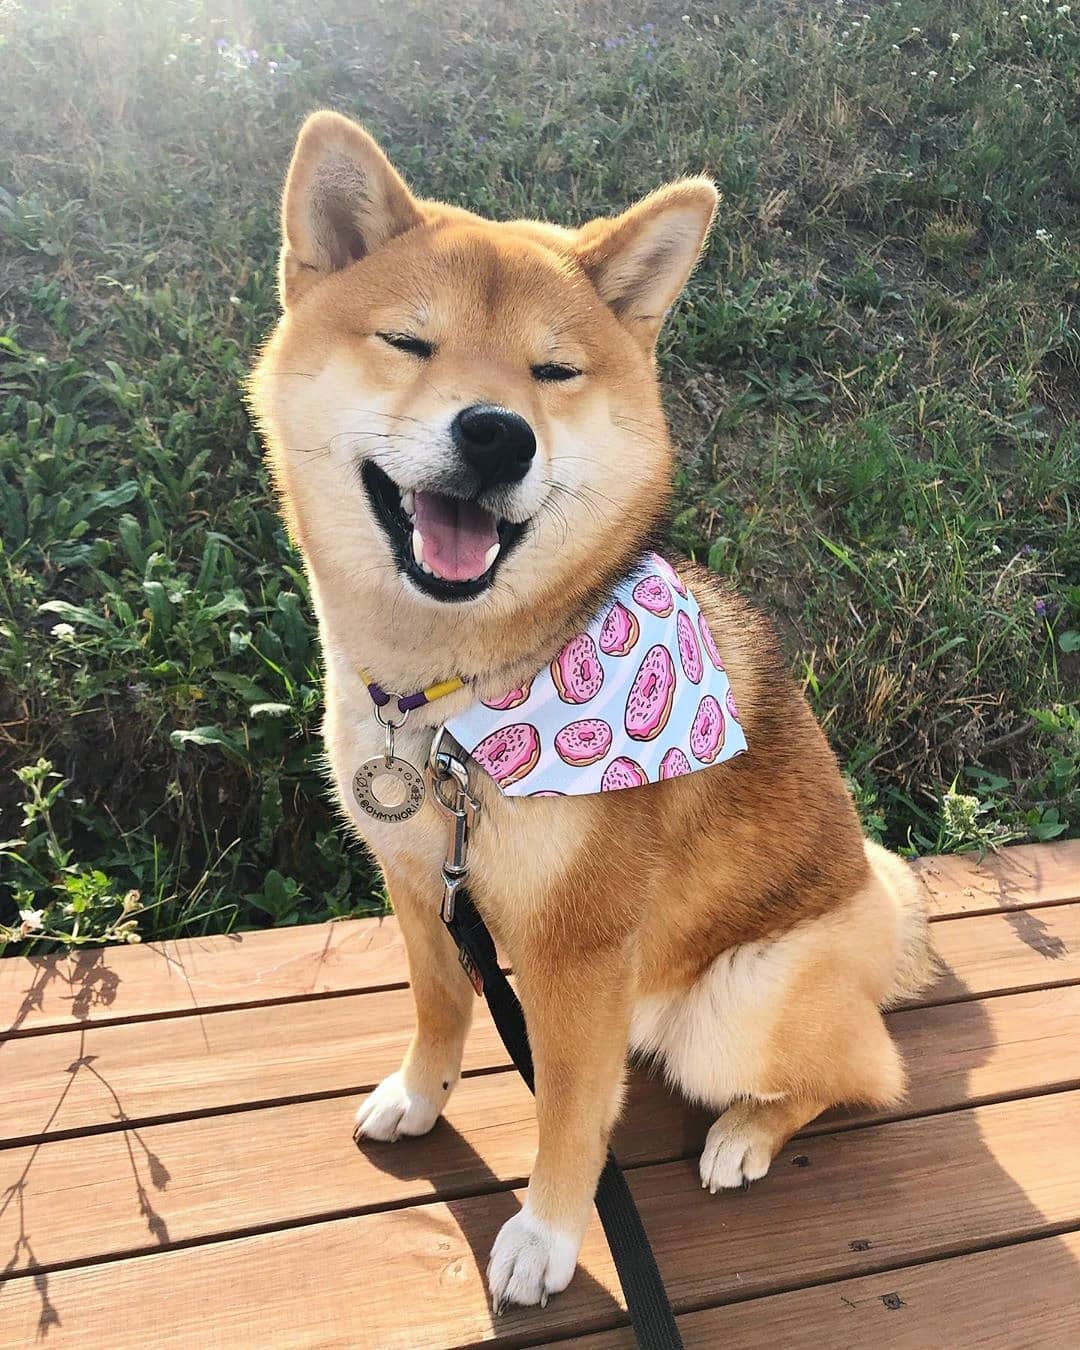 A Shiba Inu sitting on top of the wooden bench at the park while smiling